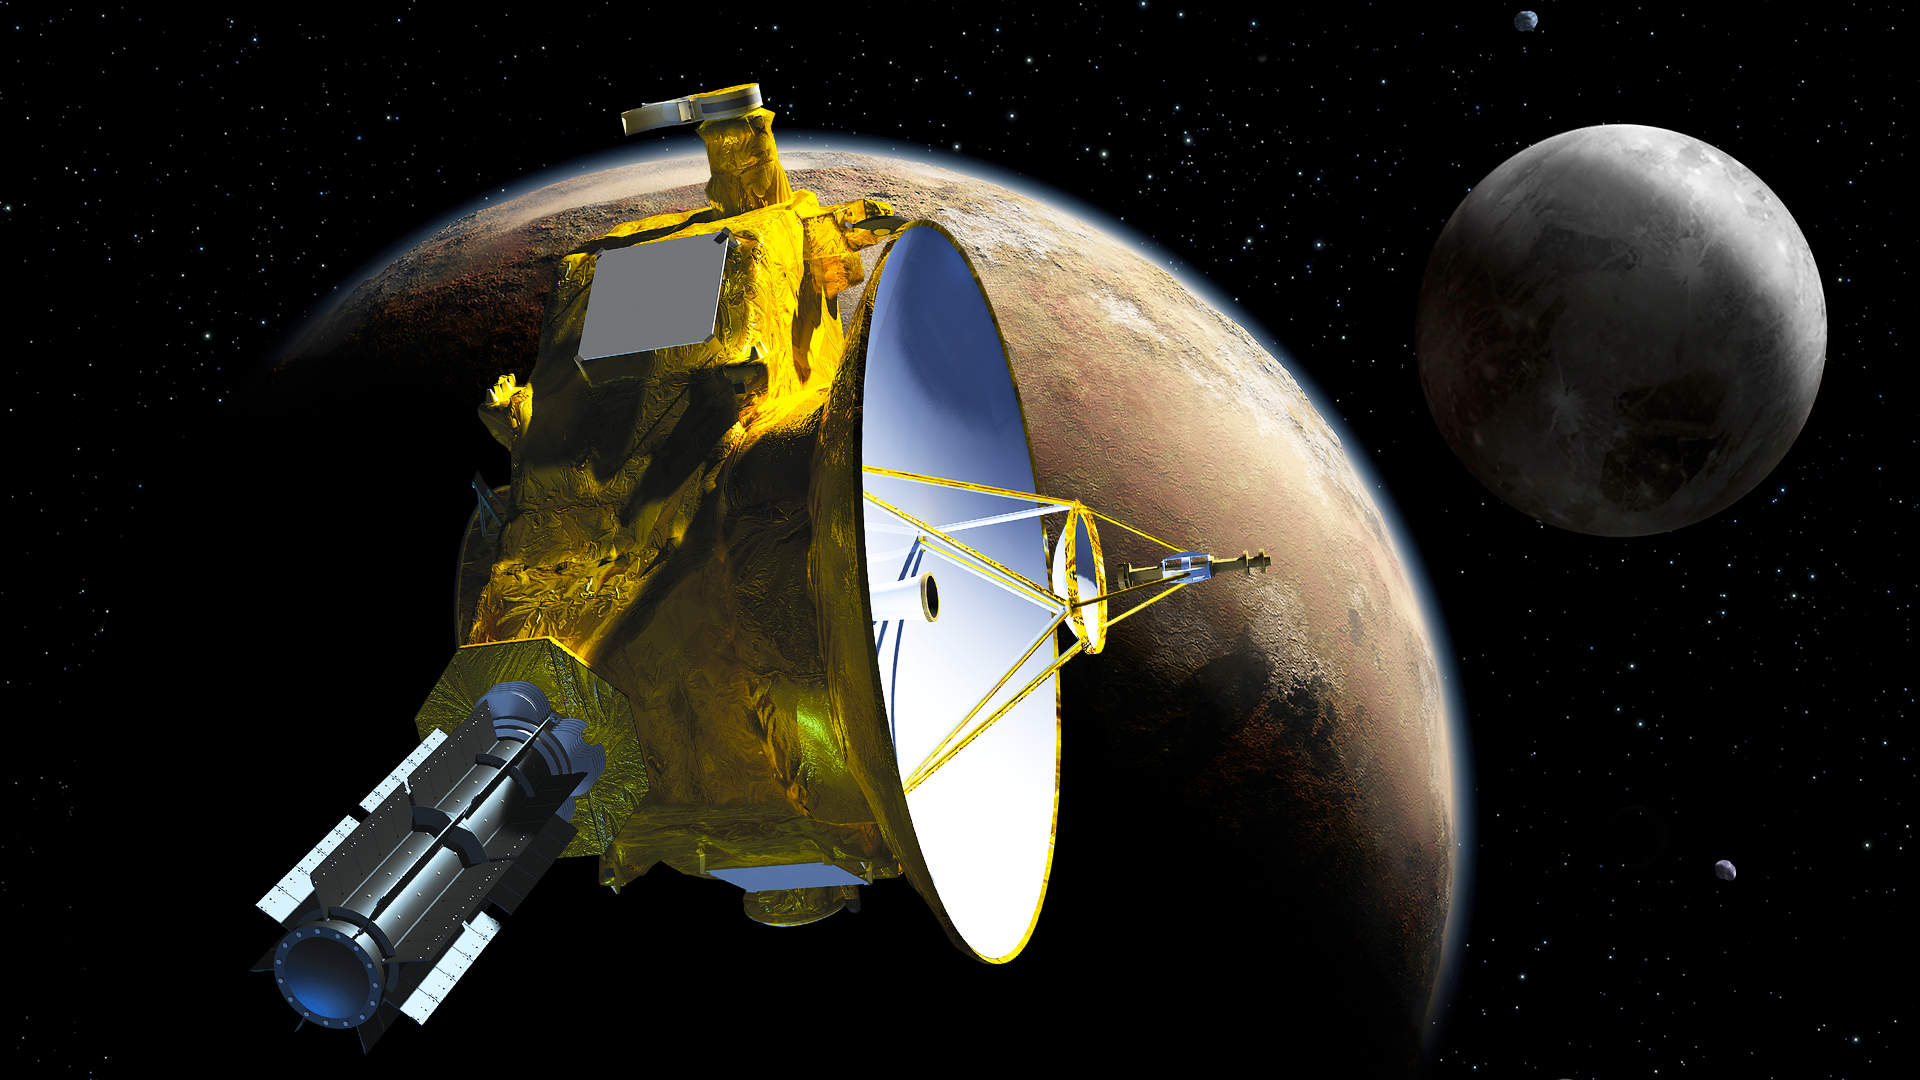 Instrument scientist Dennis Reuter answers questions about Pluto, NASA’s New Horizons spacecraft, and the Ralph infrared and visible spectrometer.Watch this video on the NASAexplorer YouTube channel.For complete transcript, click here.